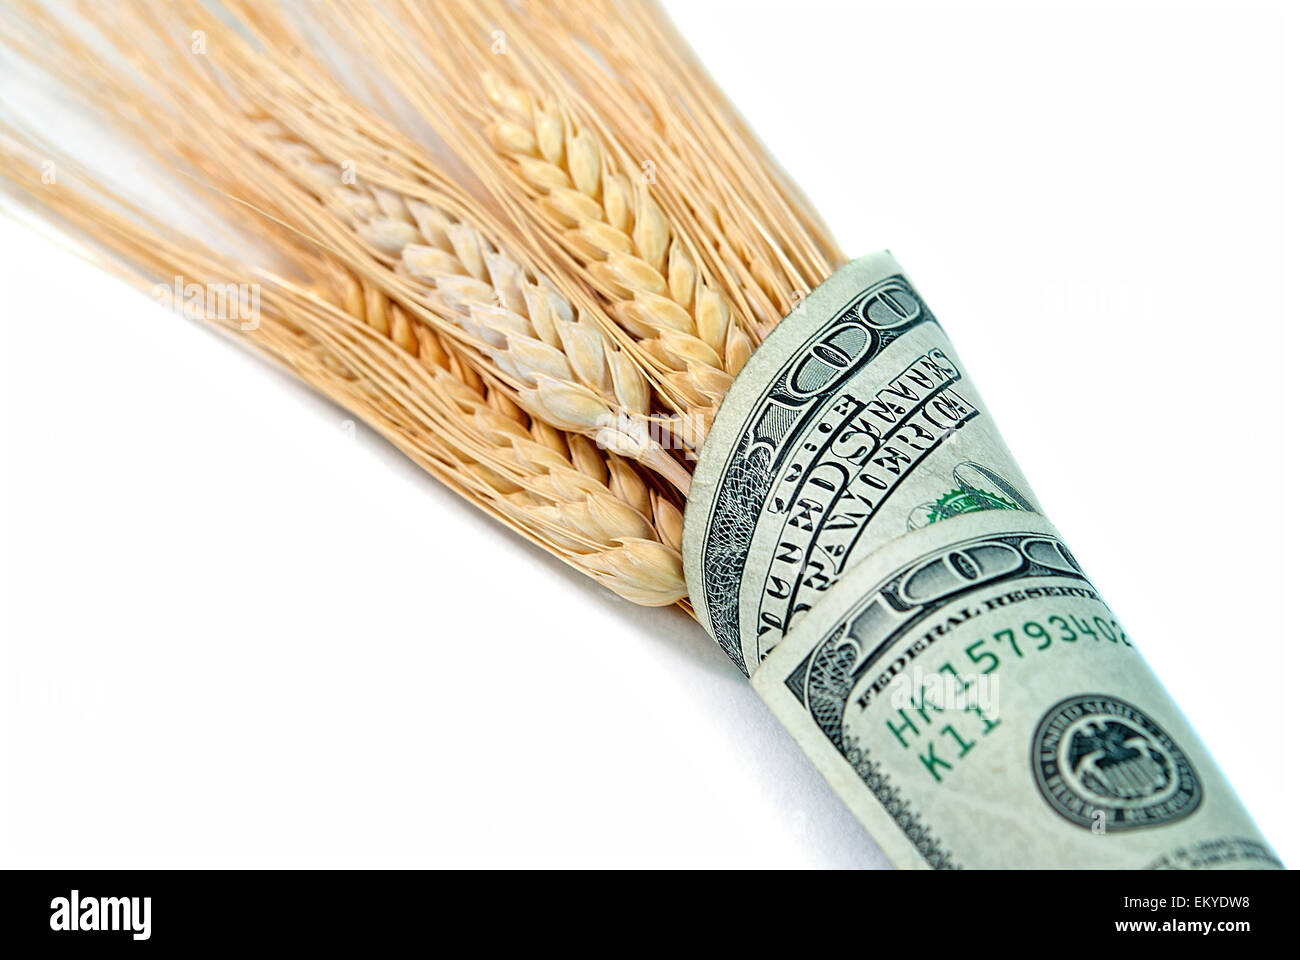 Sheaves of wheat in a hundred dollar bill isolated on white. Stock Photo